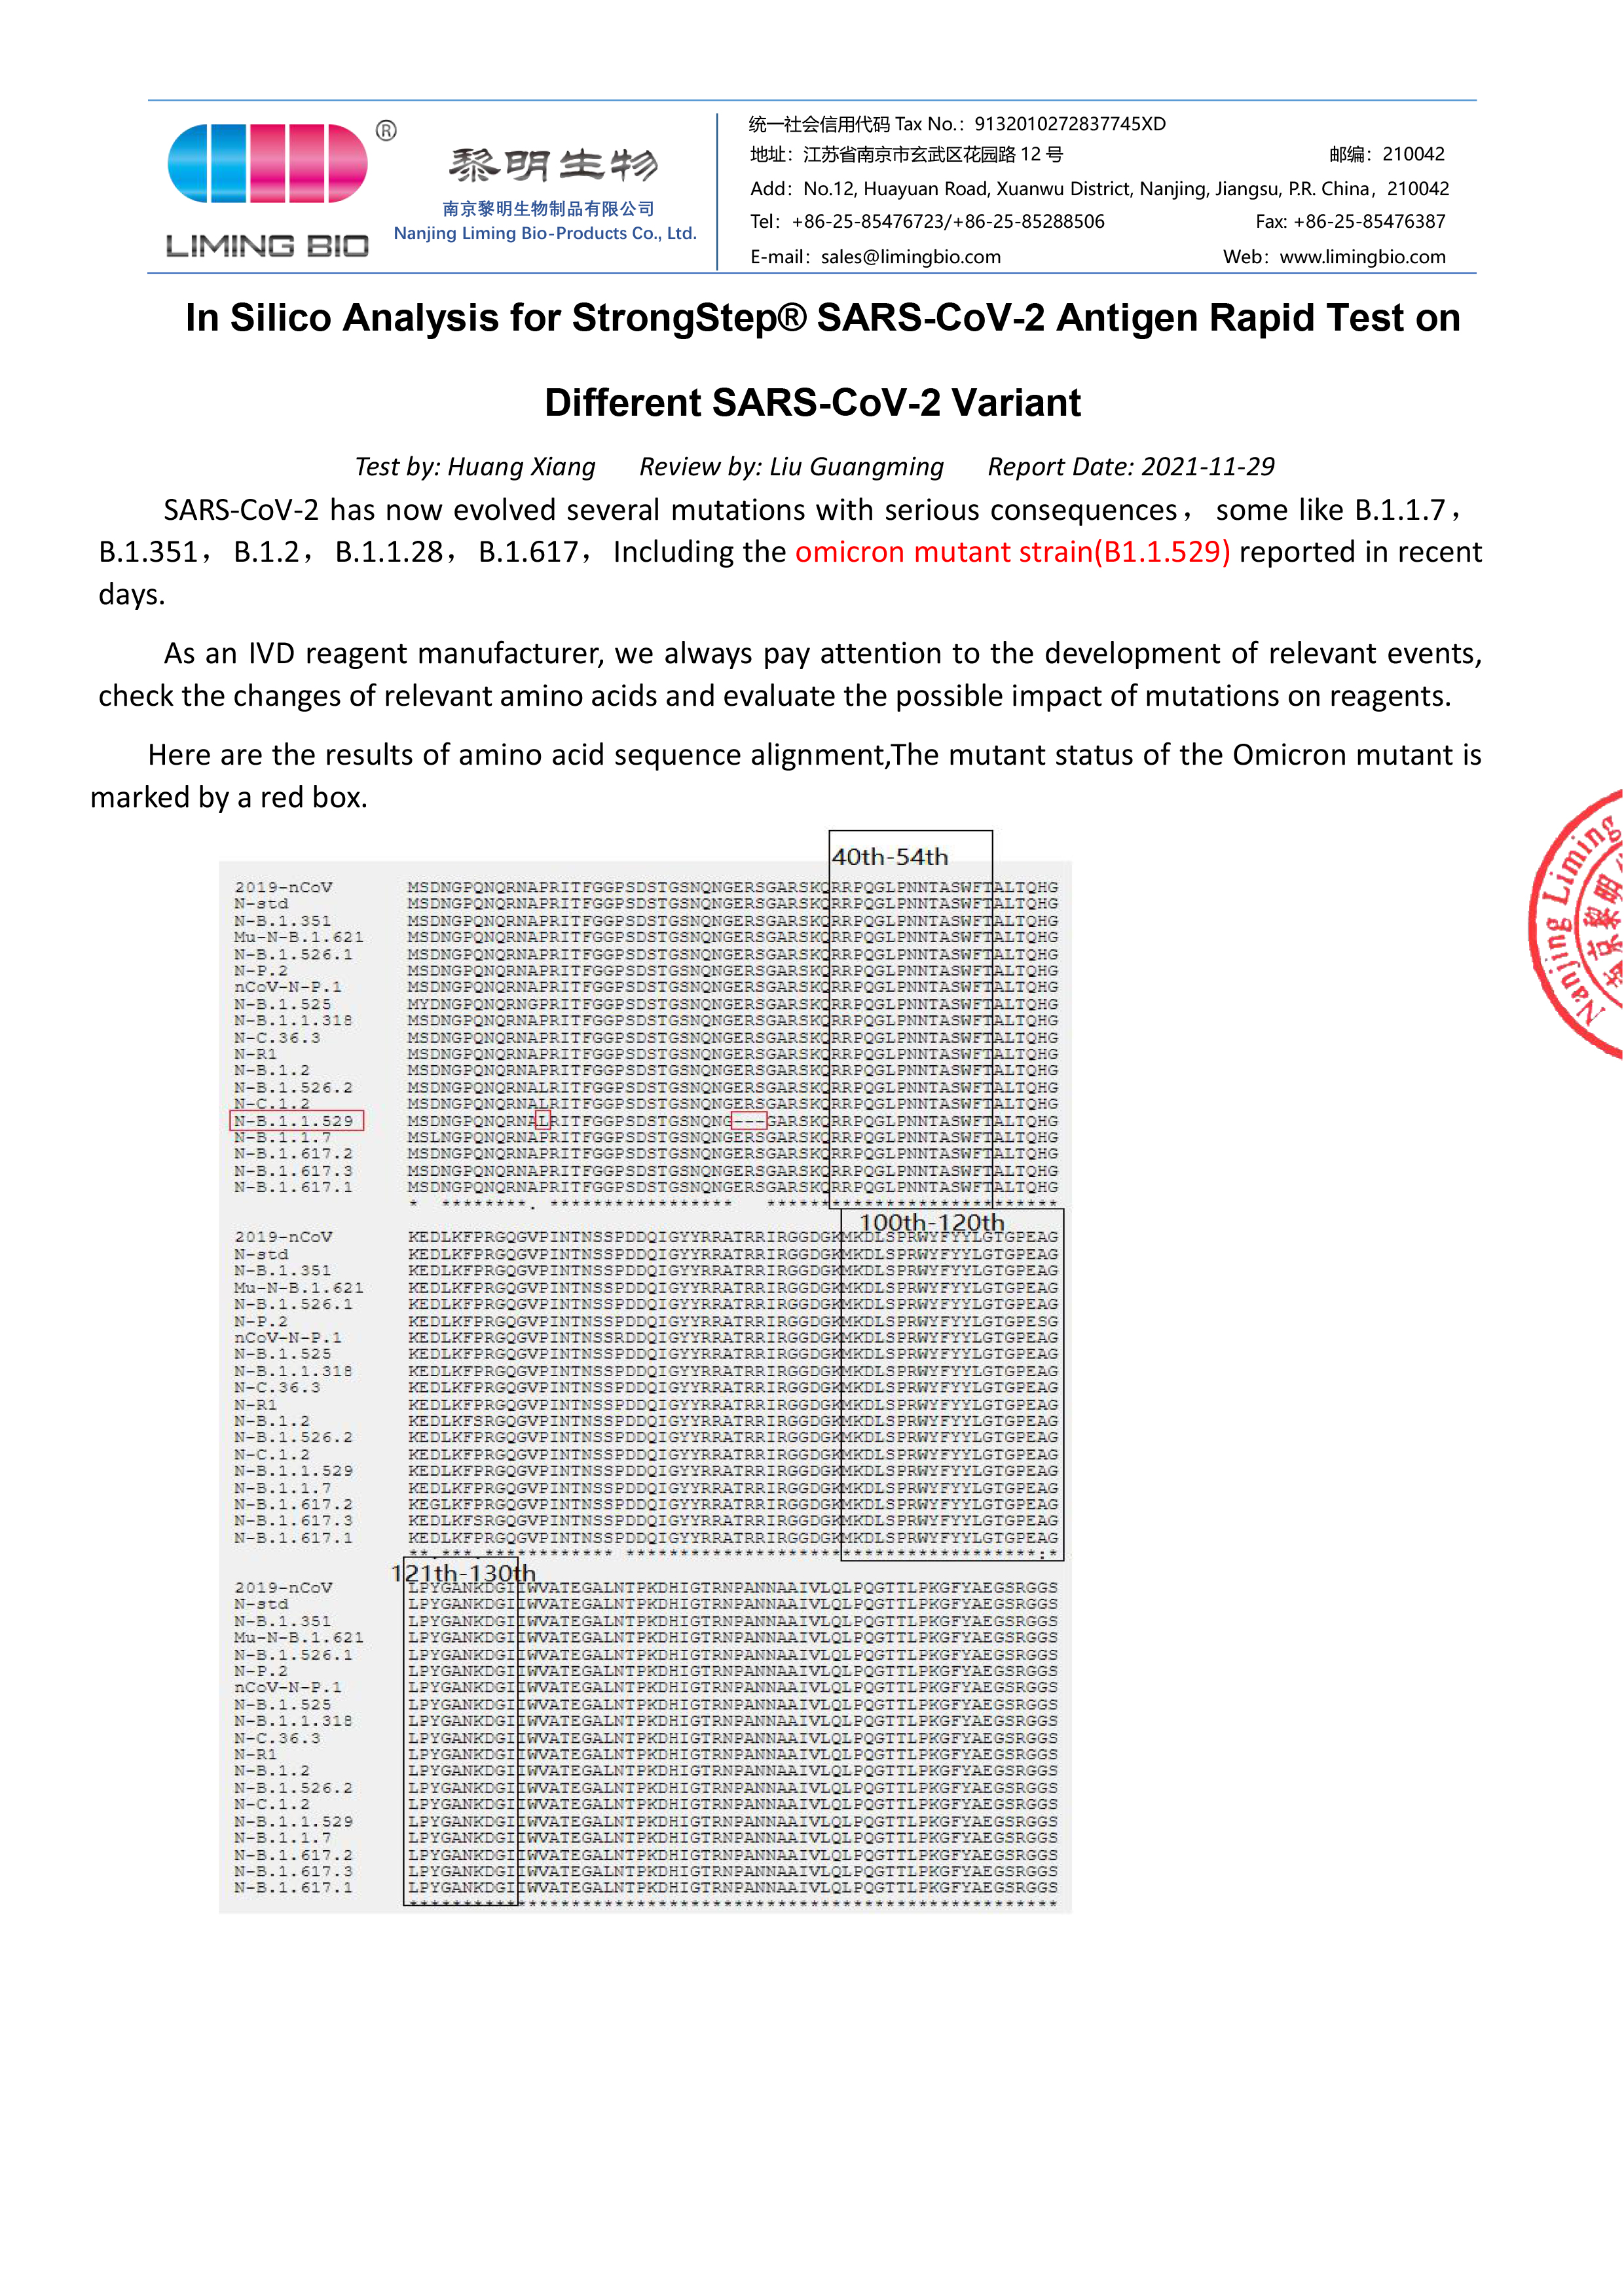 SARS-CoV-2 has now evolved several mutations with serious consequences，some like B.1.1.7，B.1.351，B.1.2，B.1.1.28，B.1.617，Including the omicron mutant strain(B1.1.529) reported in recent days. As an IVD reagent manufacturer, we always pay attention to the development of relevant events, check the changes of relevant amino acids and evaluate the possible impact of mutations on reagents.